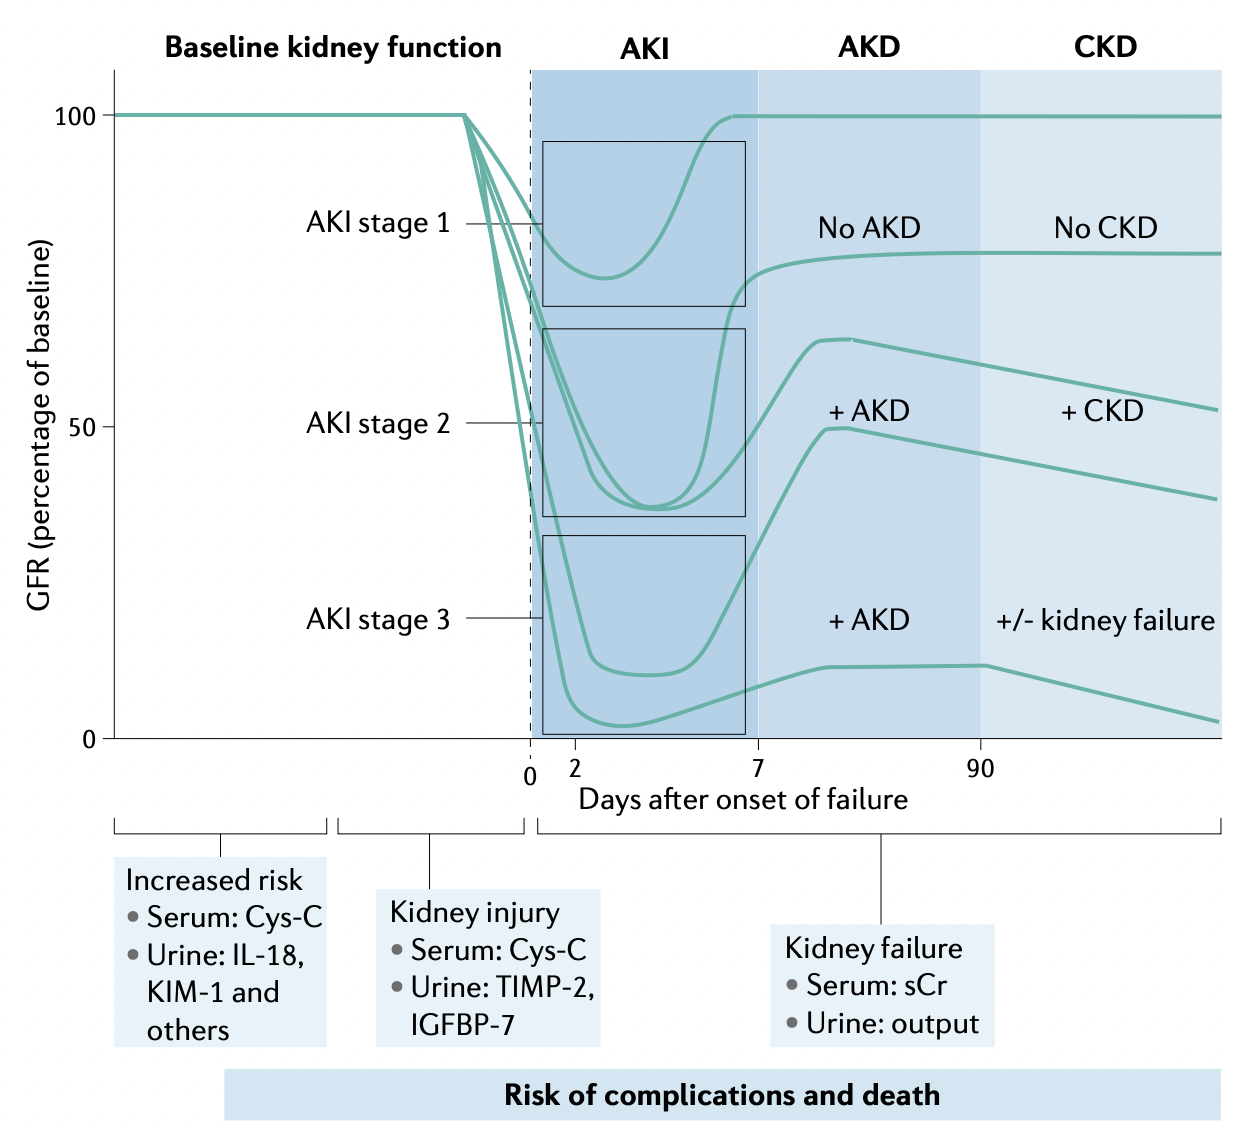 the prognosis of different stages of AKI. [1]